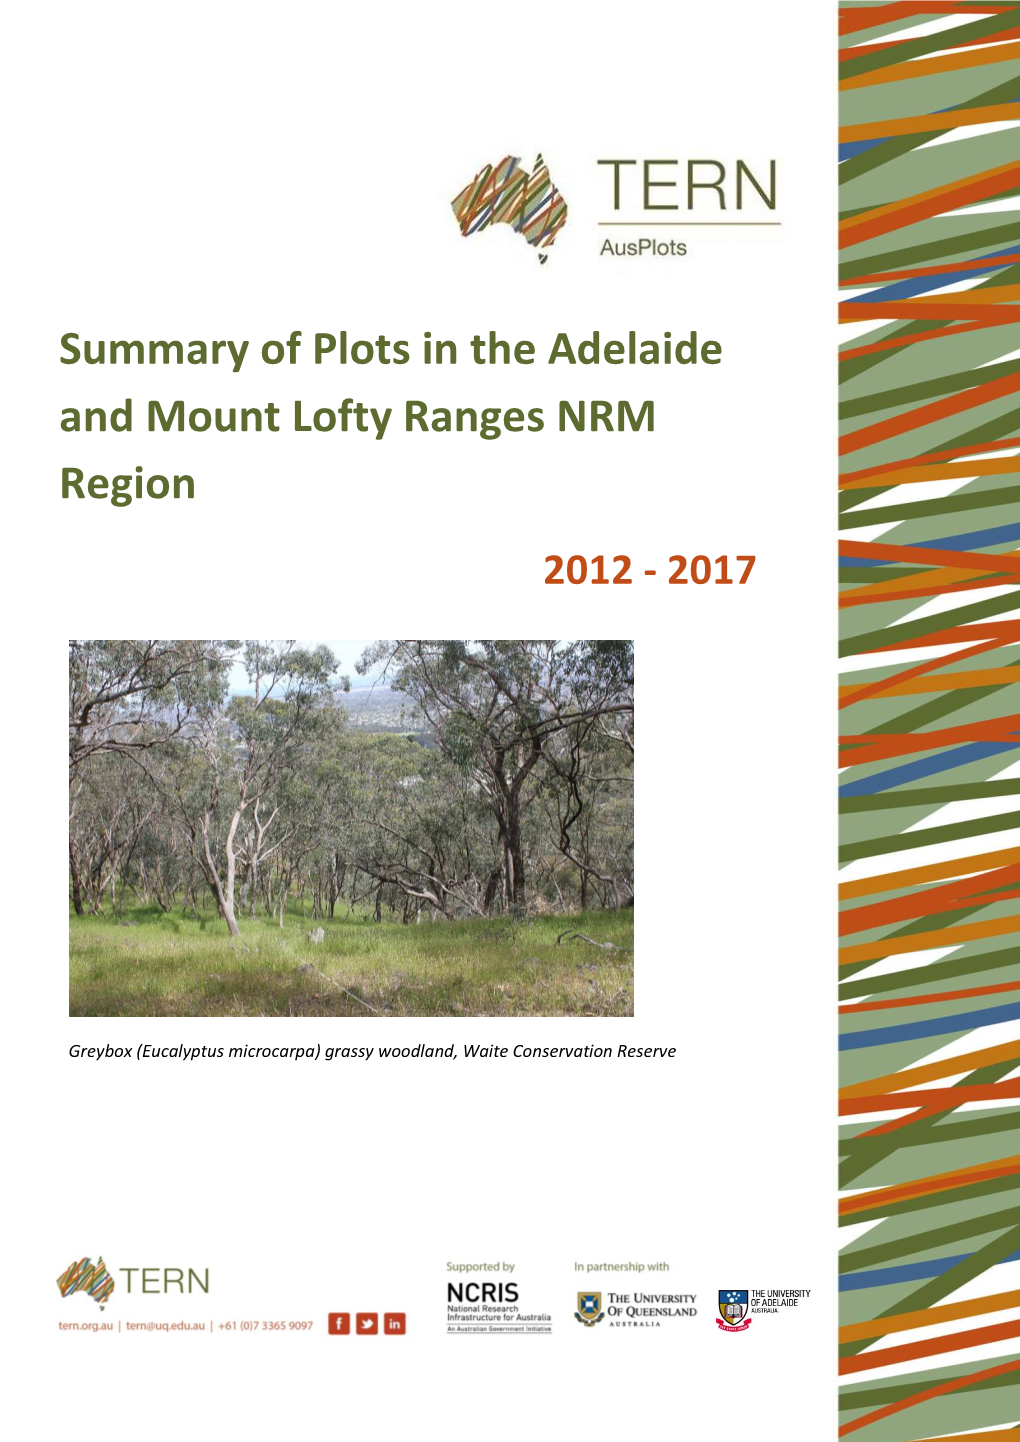 Summary of Plots in the Adelaide and Mount Lofty Ranges NRM Region